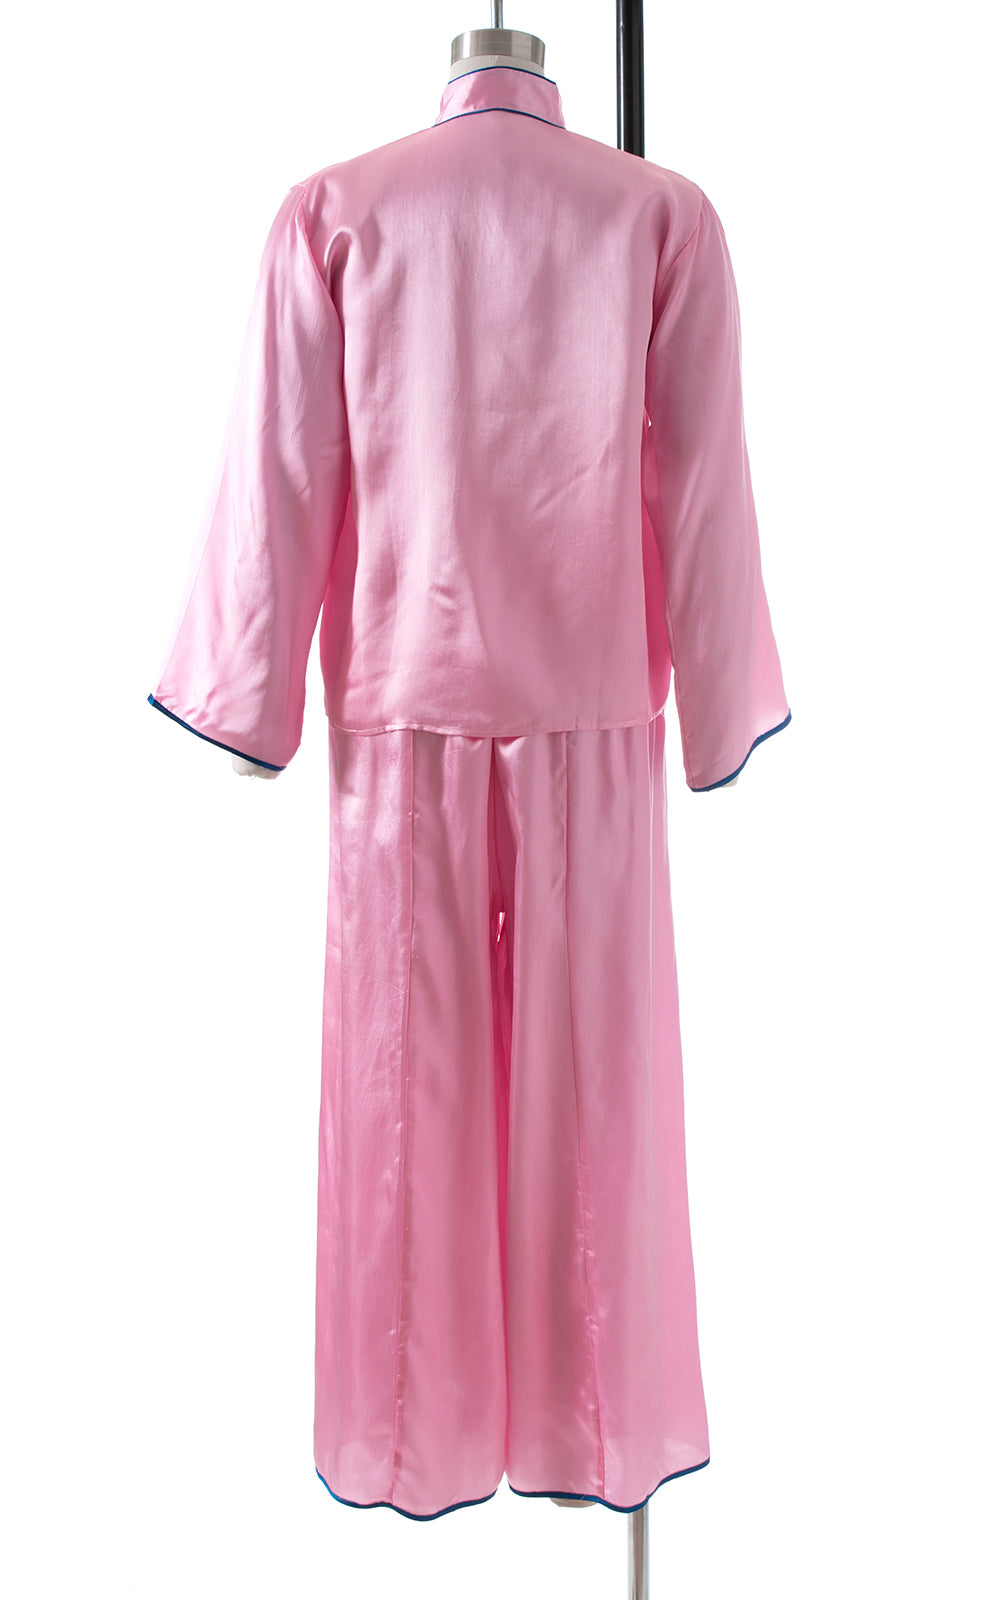 1960s Asian Dragon Embroidered Pink Satin Pajama, Robe & Slippers Set